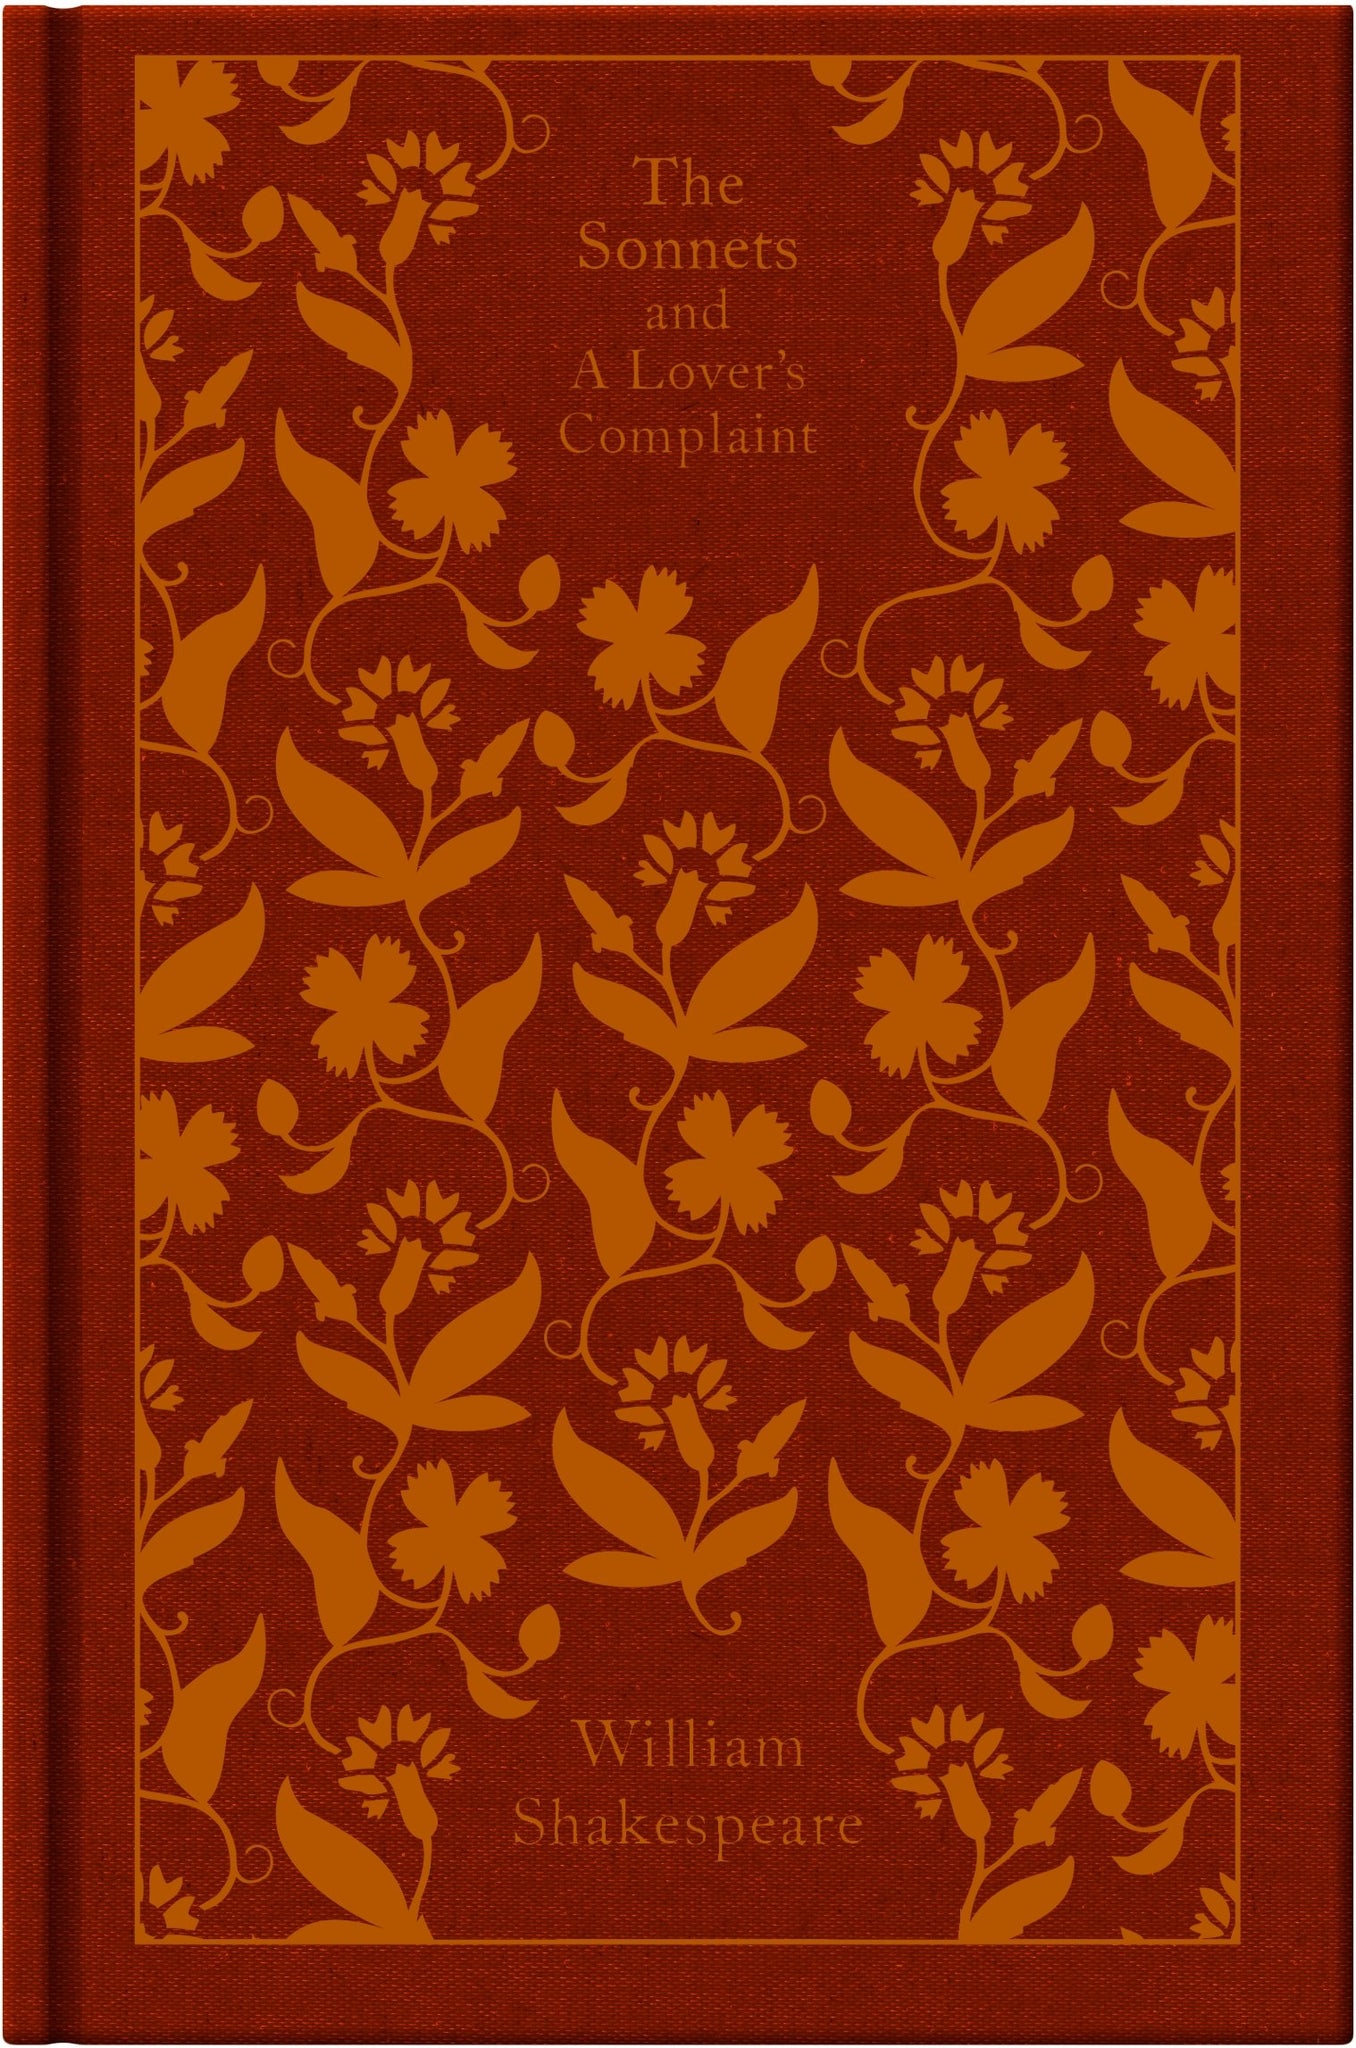 The Sonnets And A Lover's Complaint (Penguin Clothbound Classics)